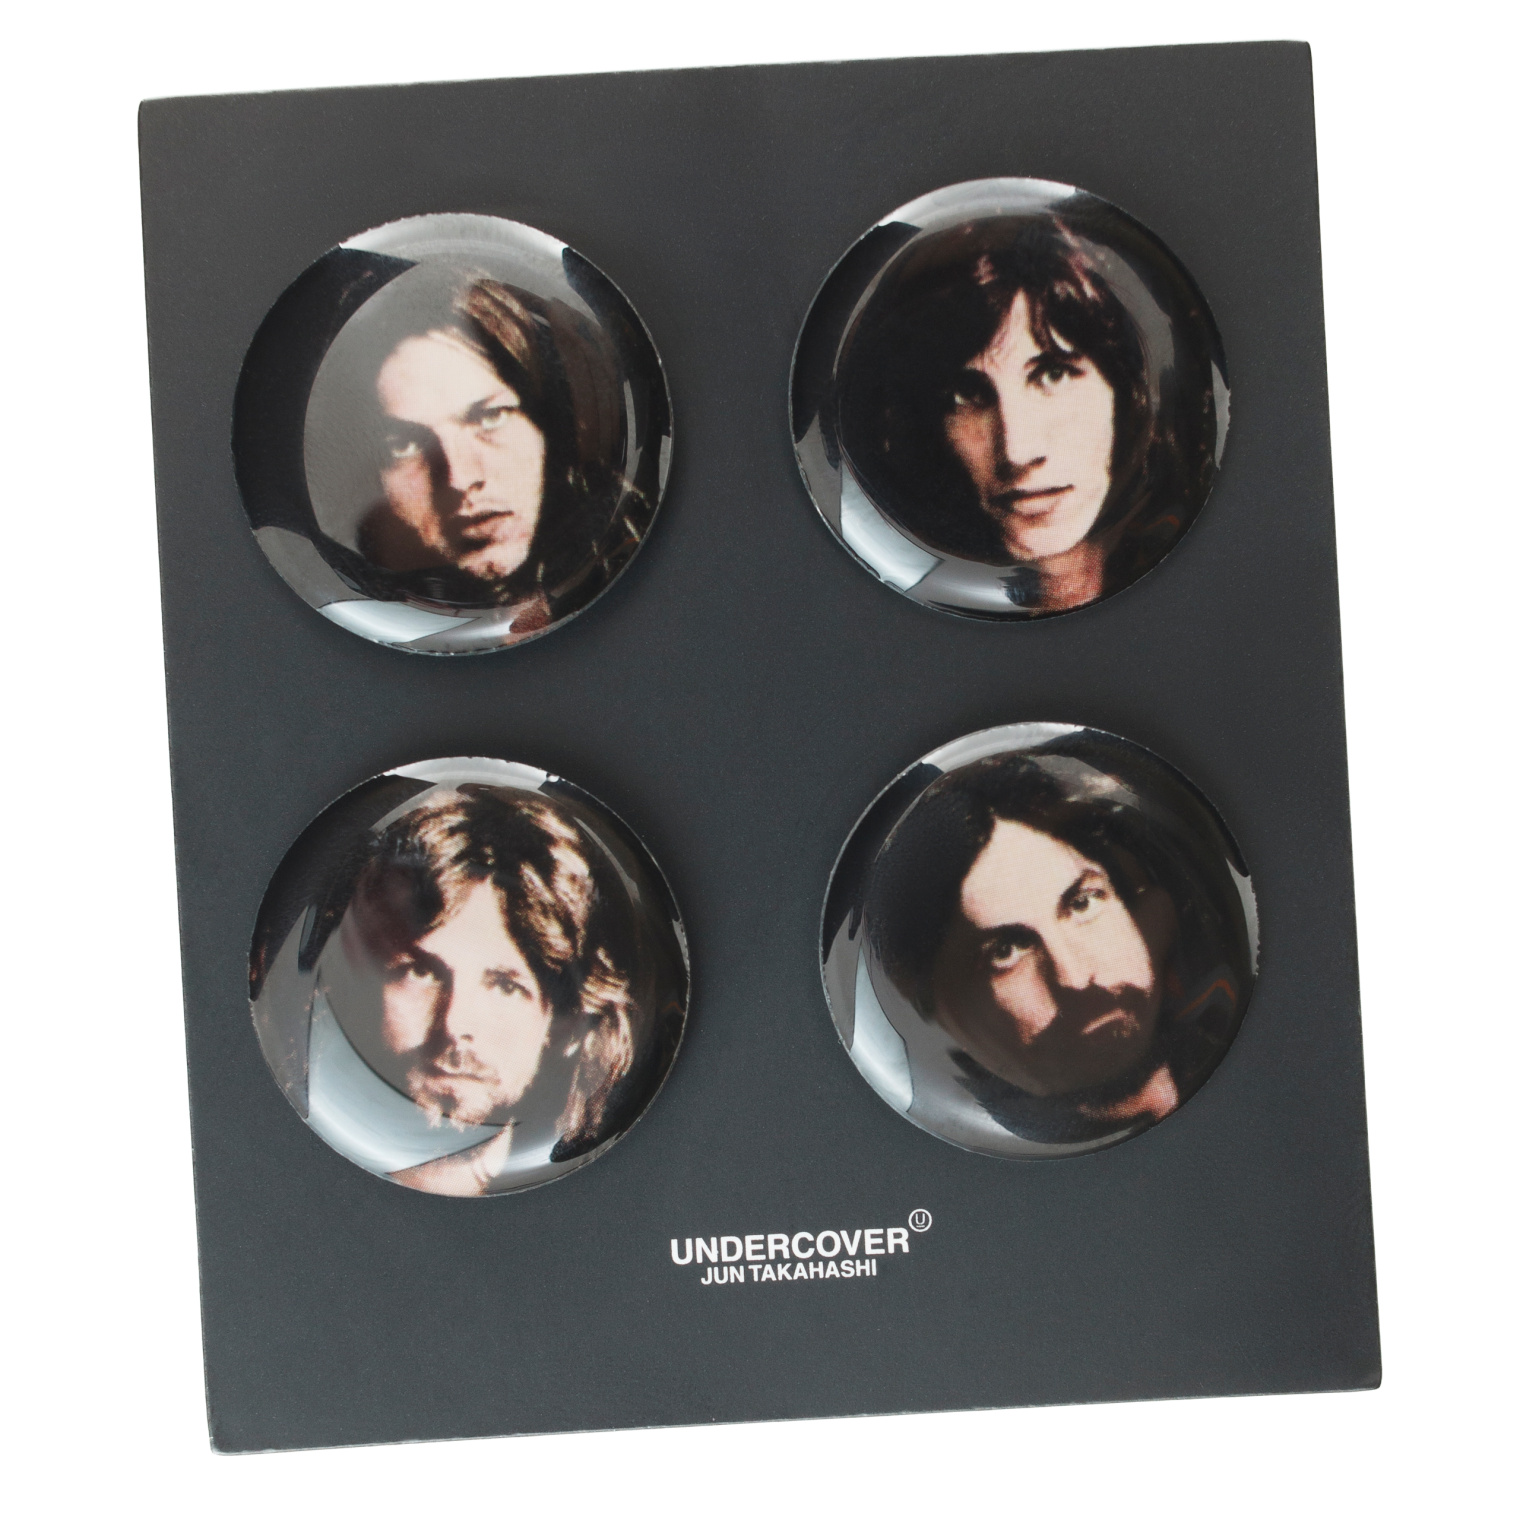 Undercover Set of badges photos of Pink Floyd members